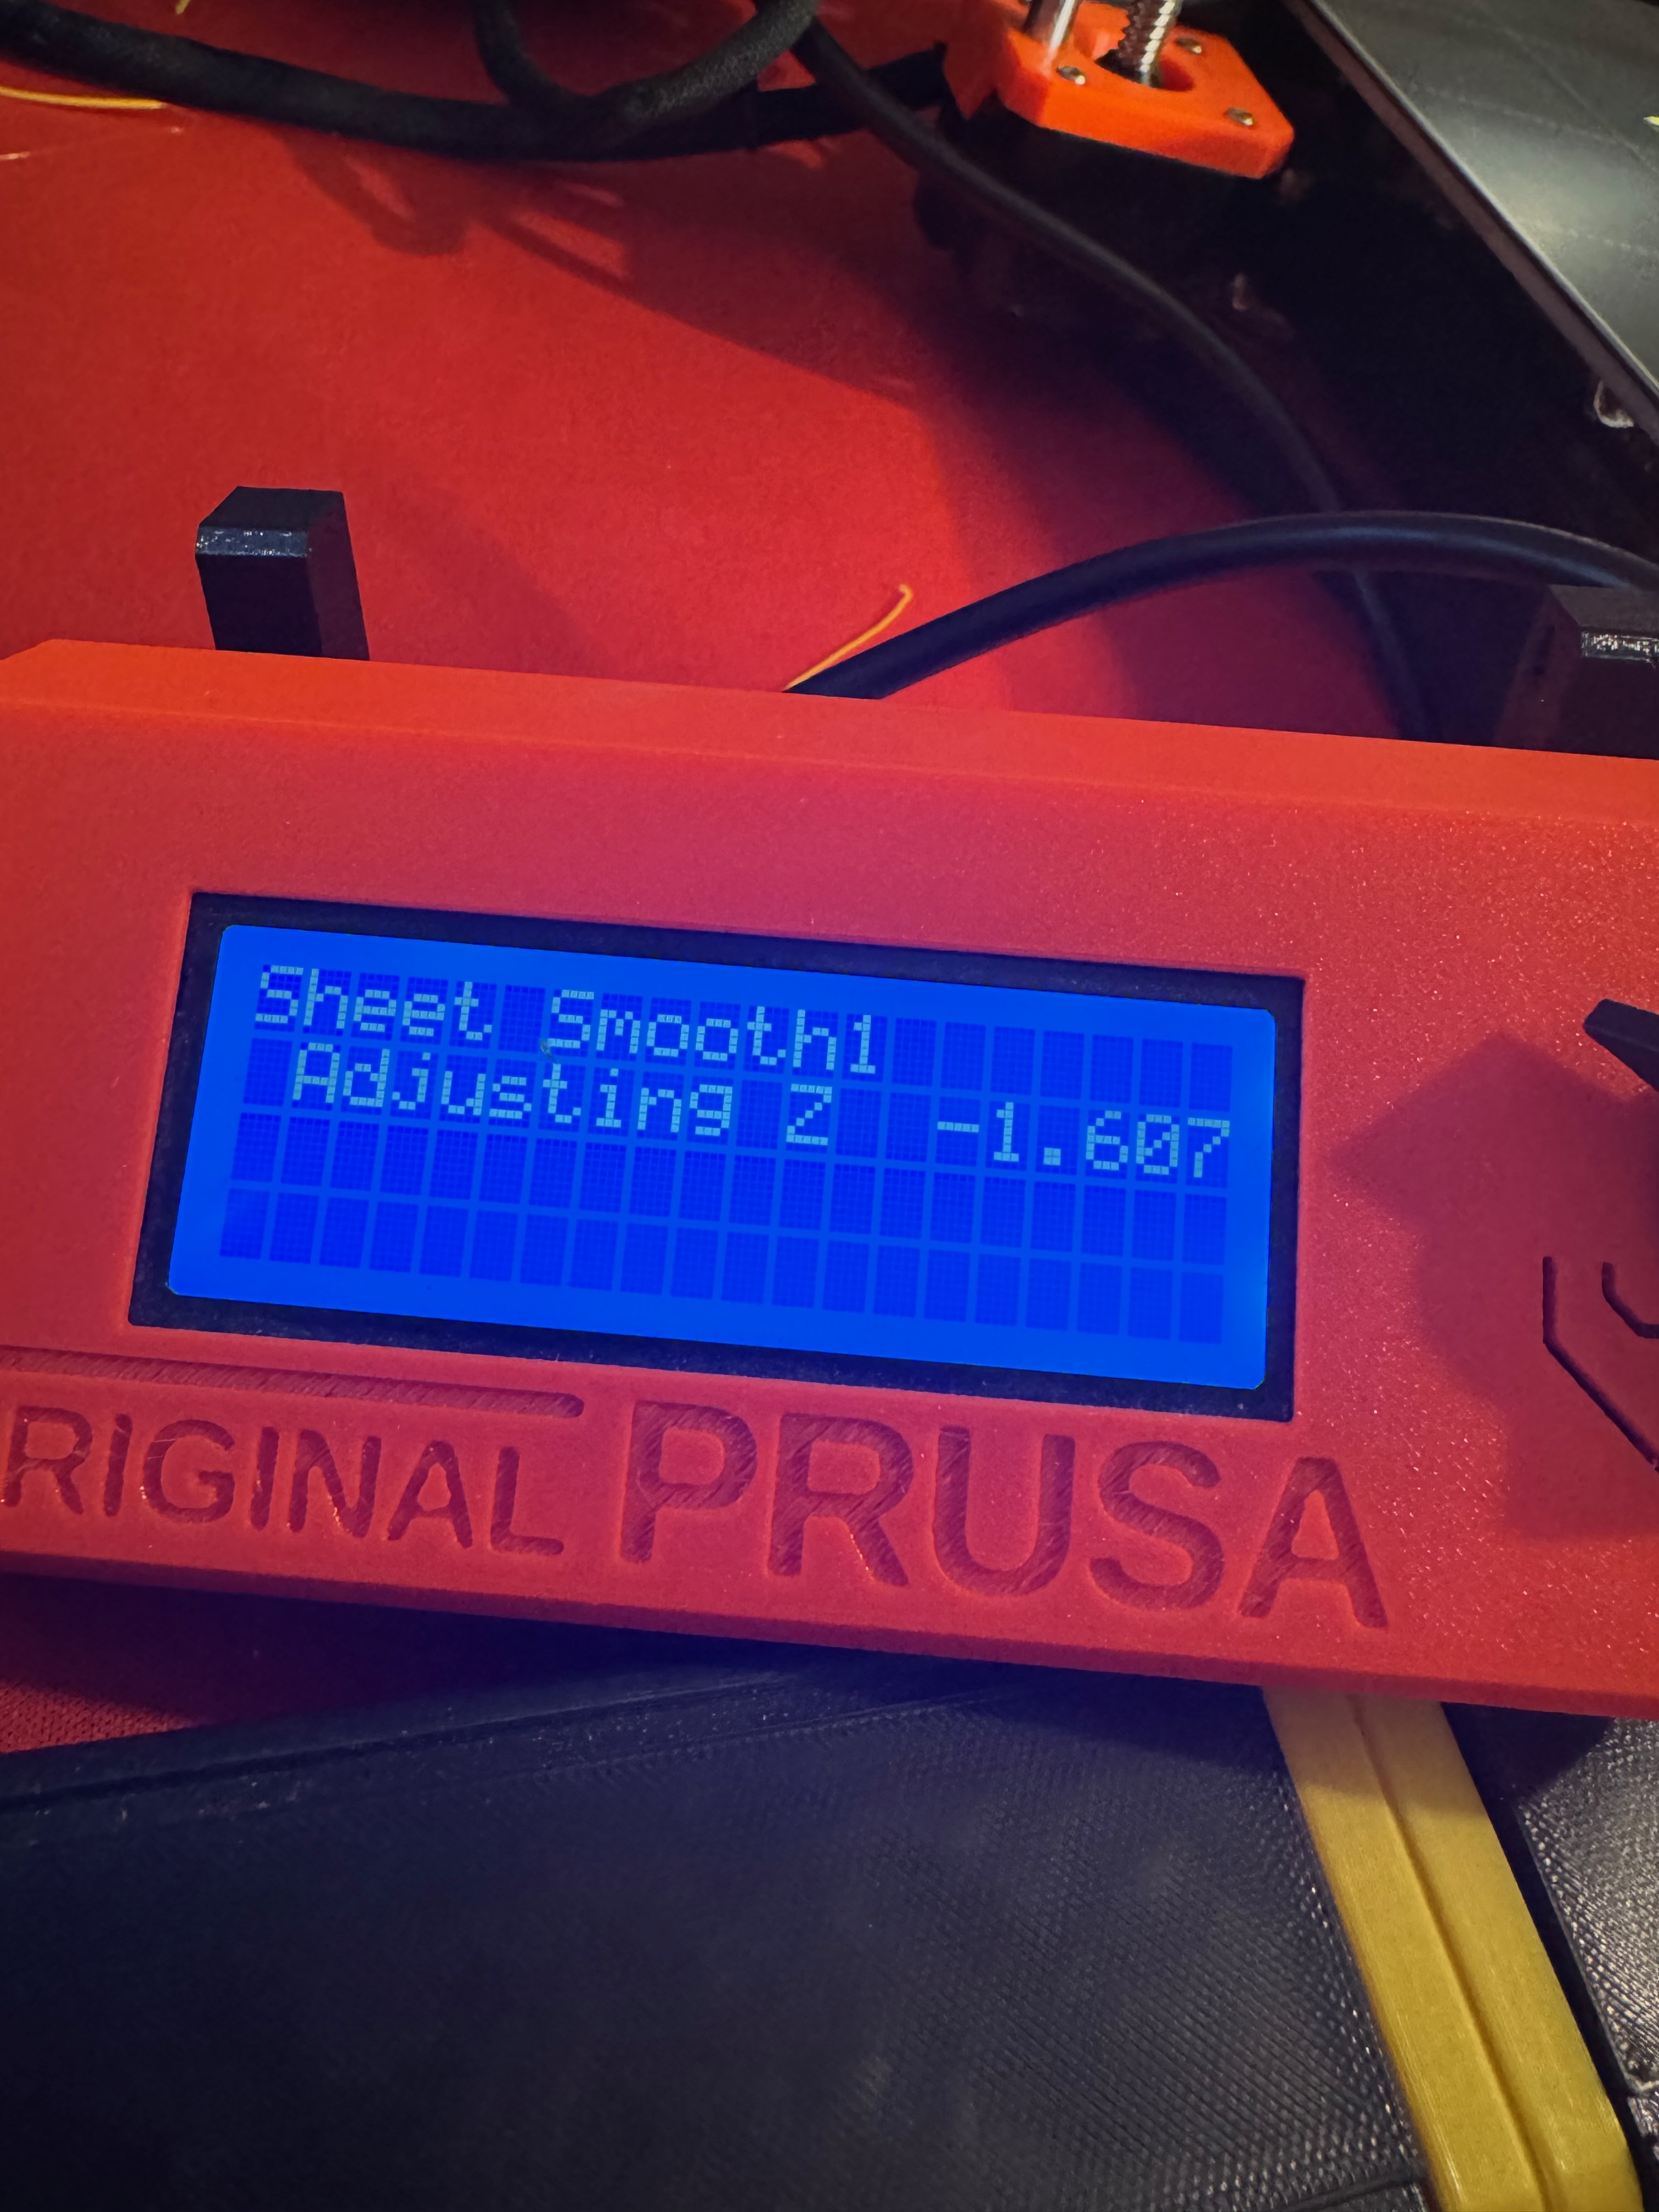 The screen of the Prusa 